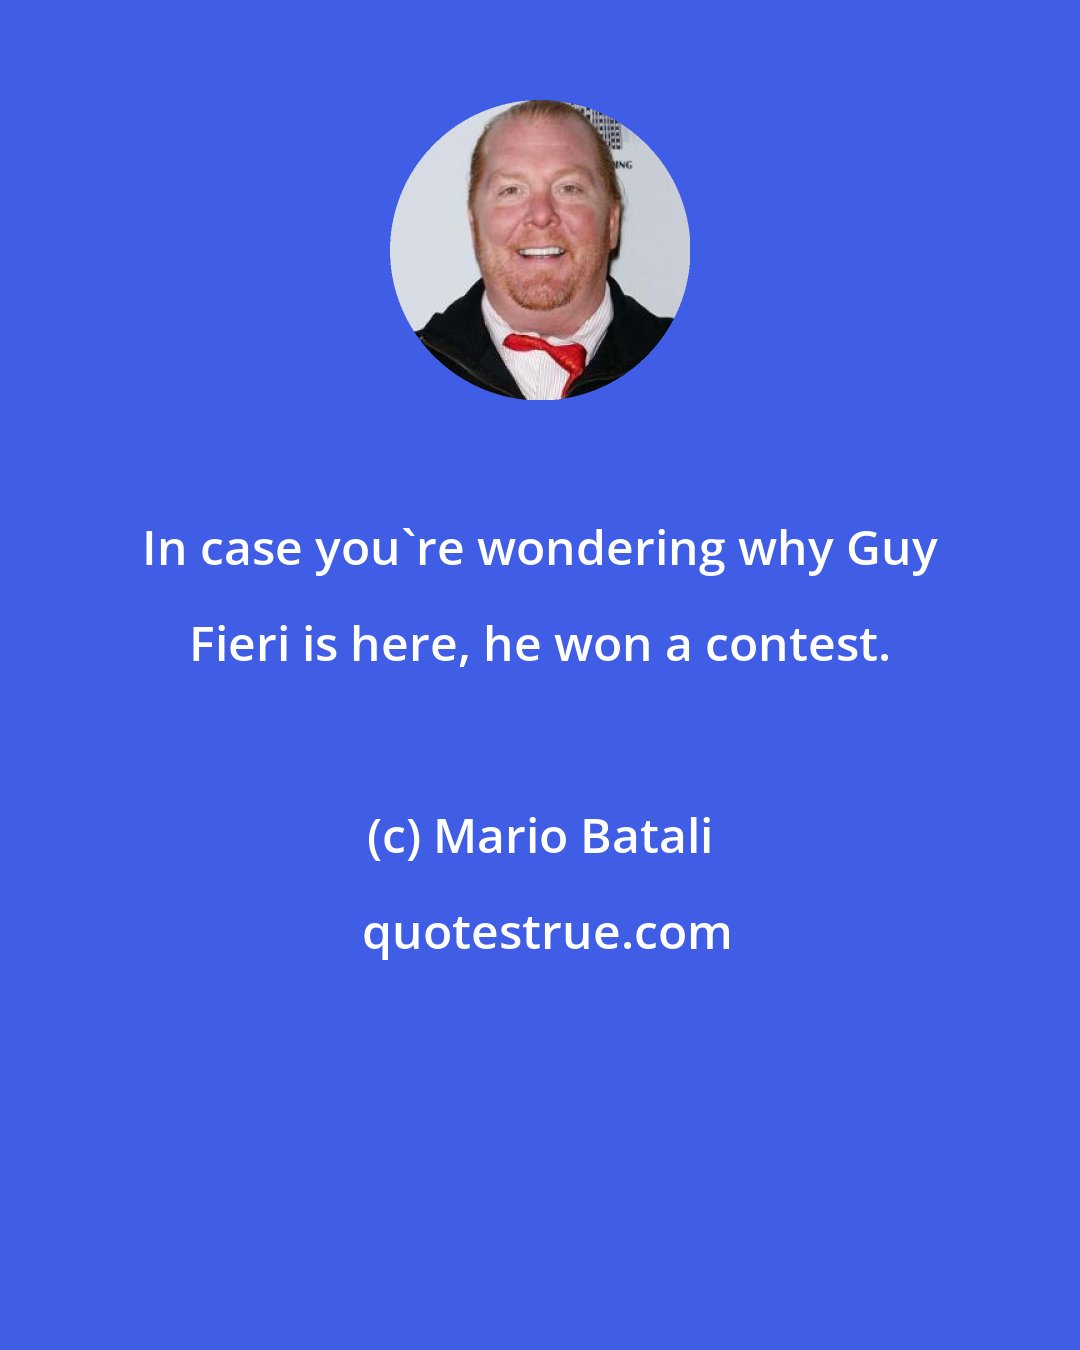 Mario Batali: In case you're wondering why Guy Fieri is here, he won a contest.